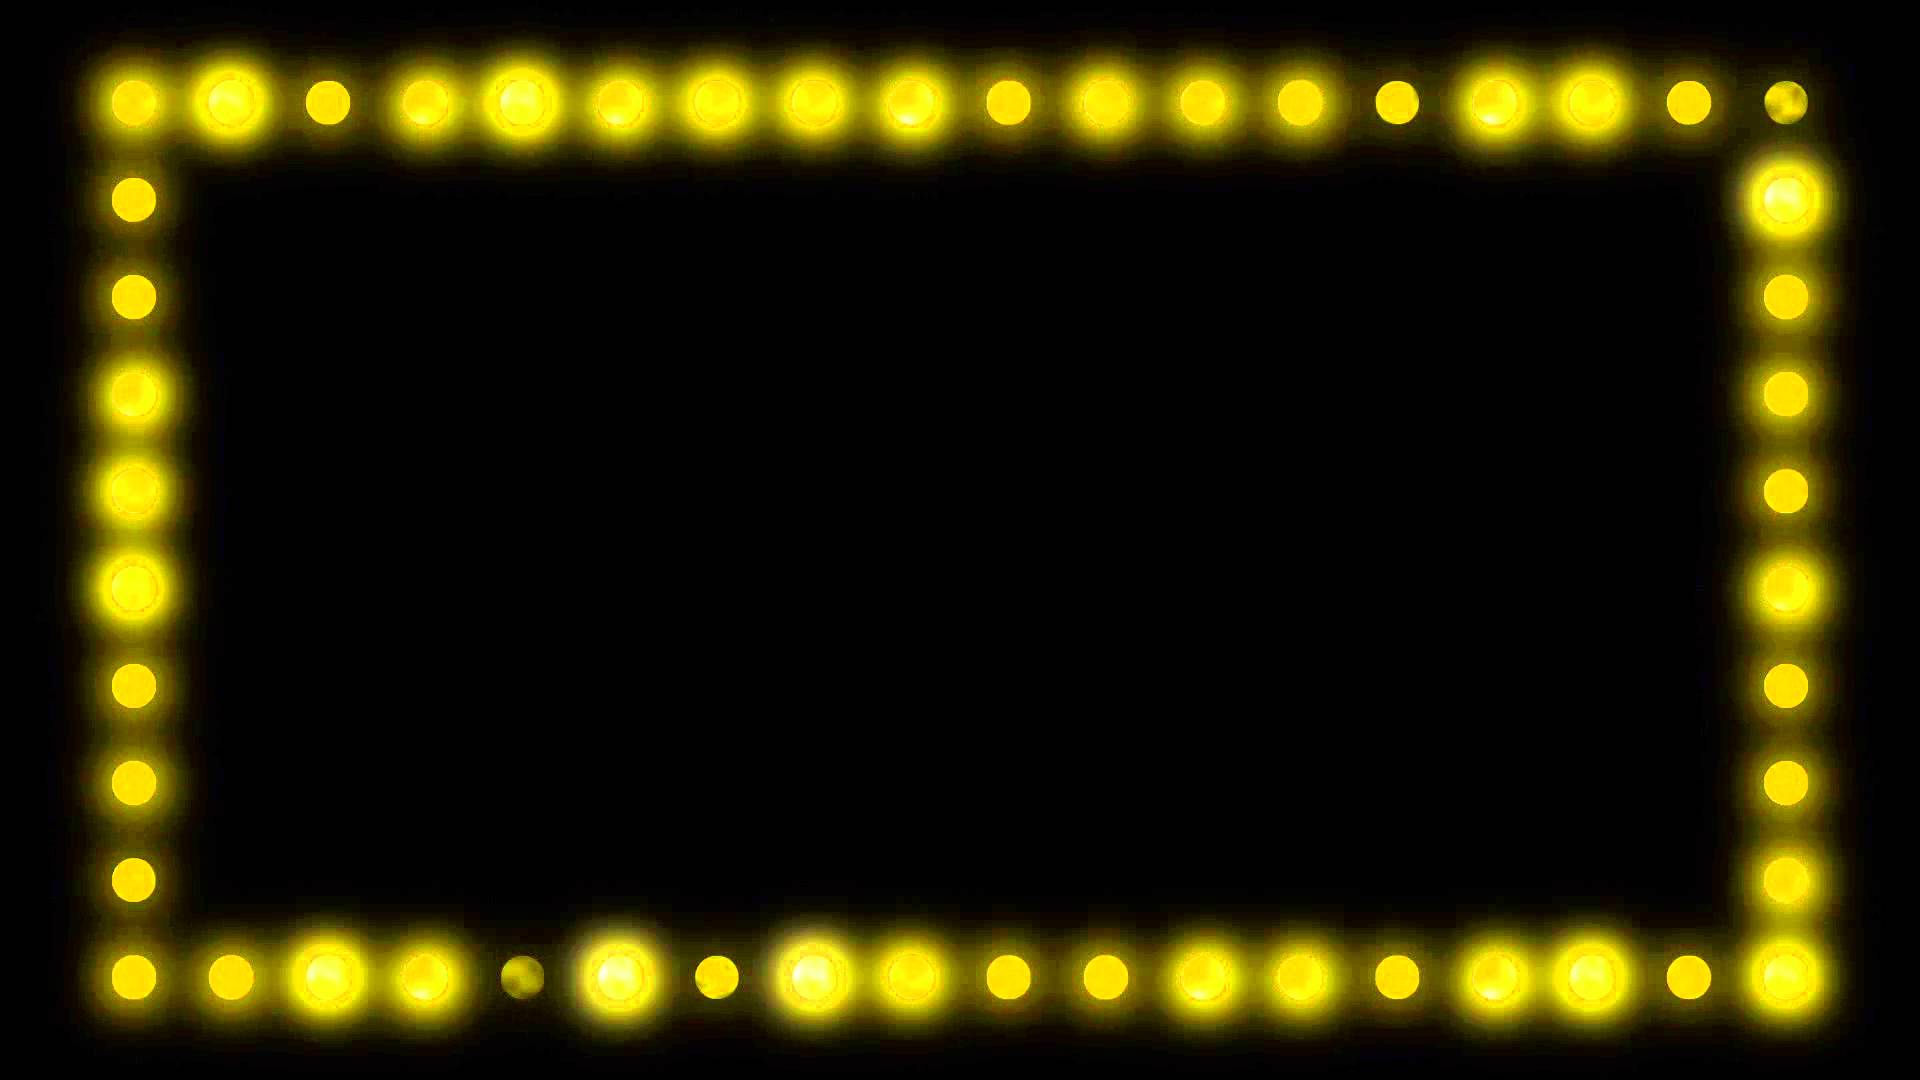 Marquee Border Lights   Hd Video Background Loop   Youtube